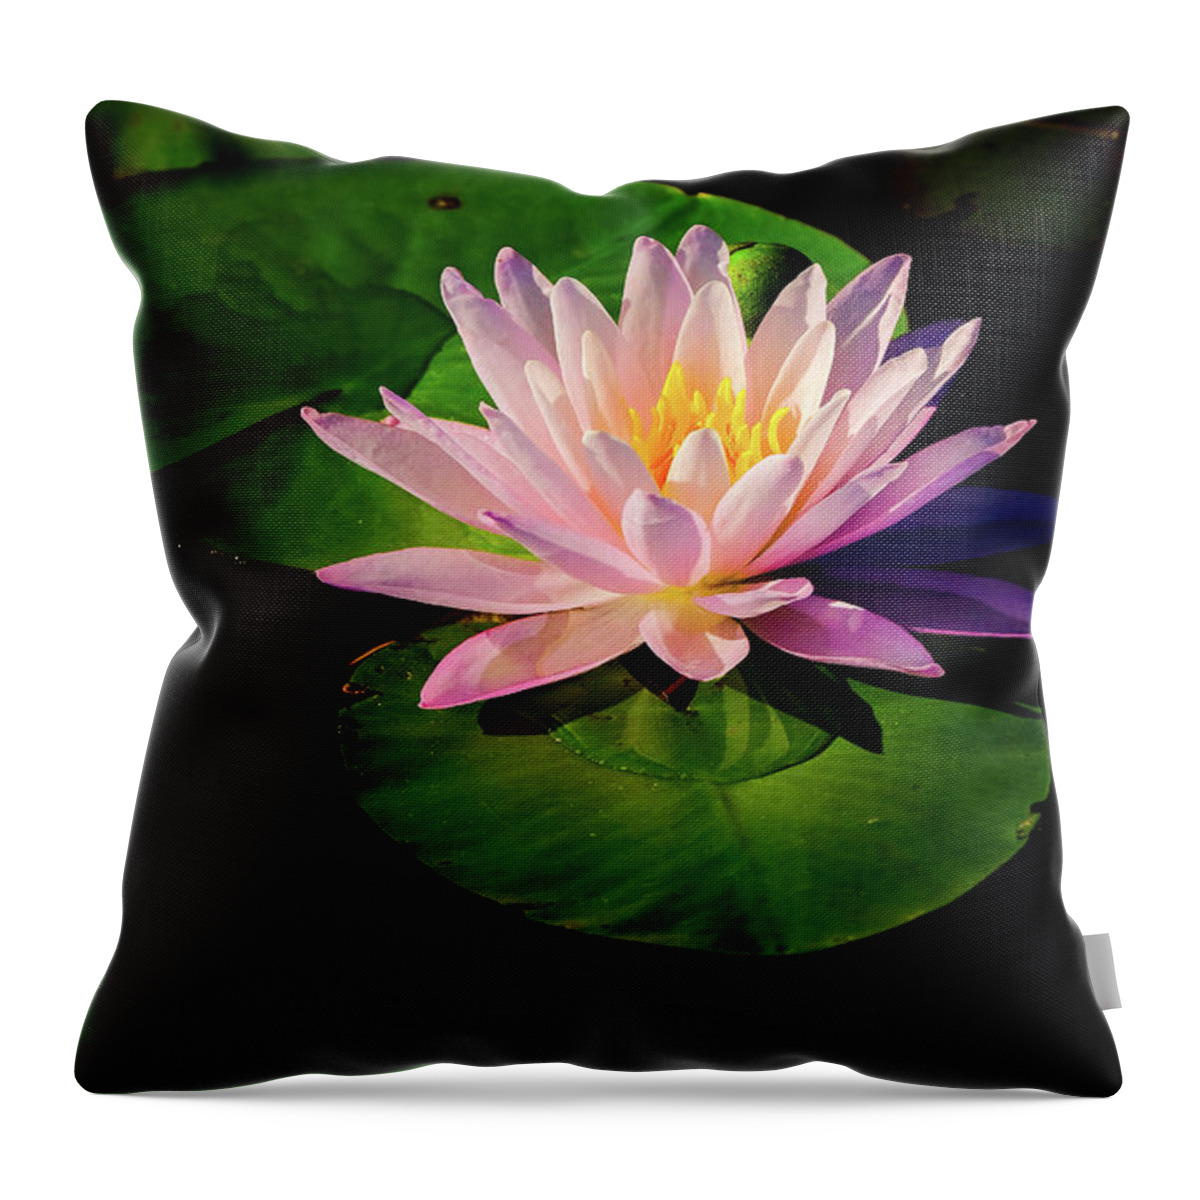 Aquatic Throw Pillow featuring the photograph In The Spotlight by Jeff Sinon